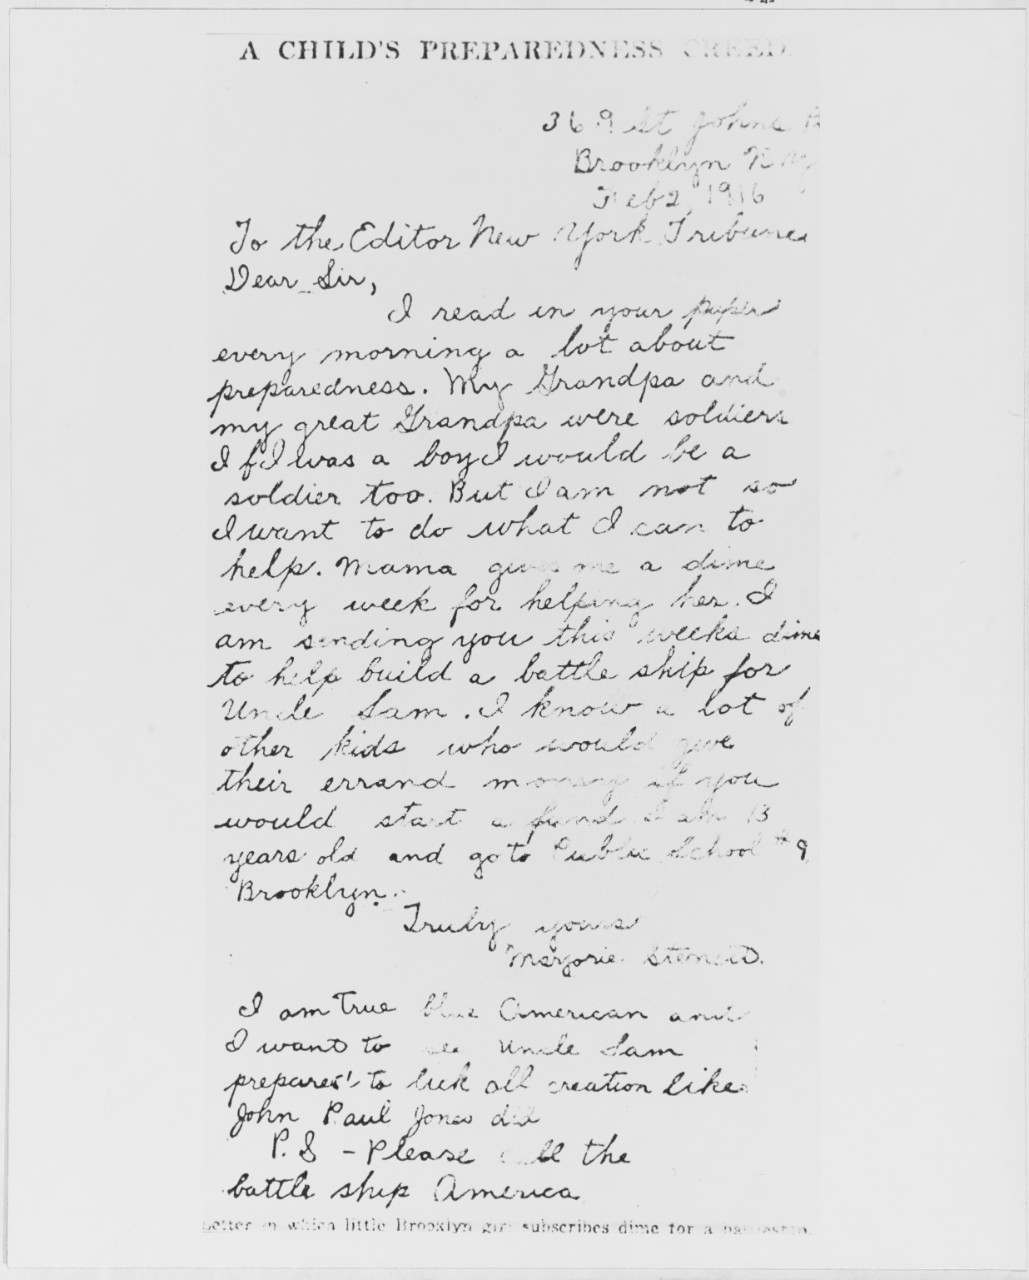 Letter from Marjorie Sterrett to the Editor of the New York Tribune, 1916